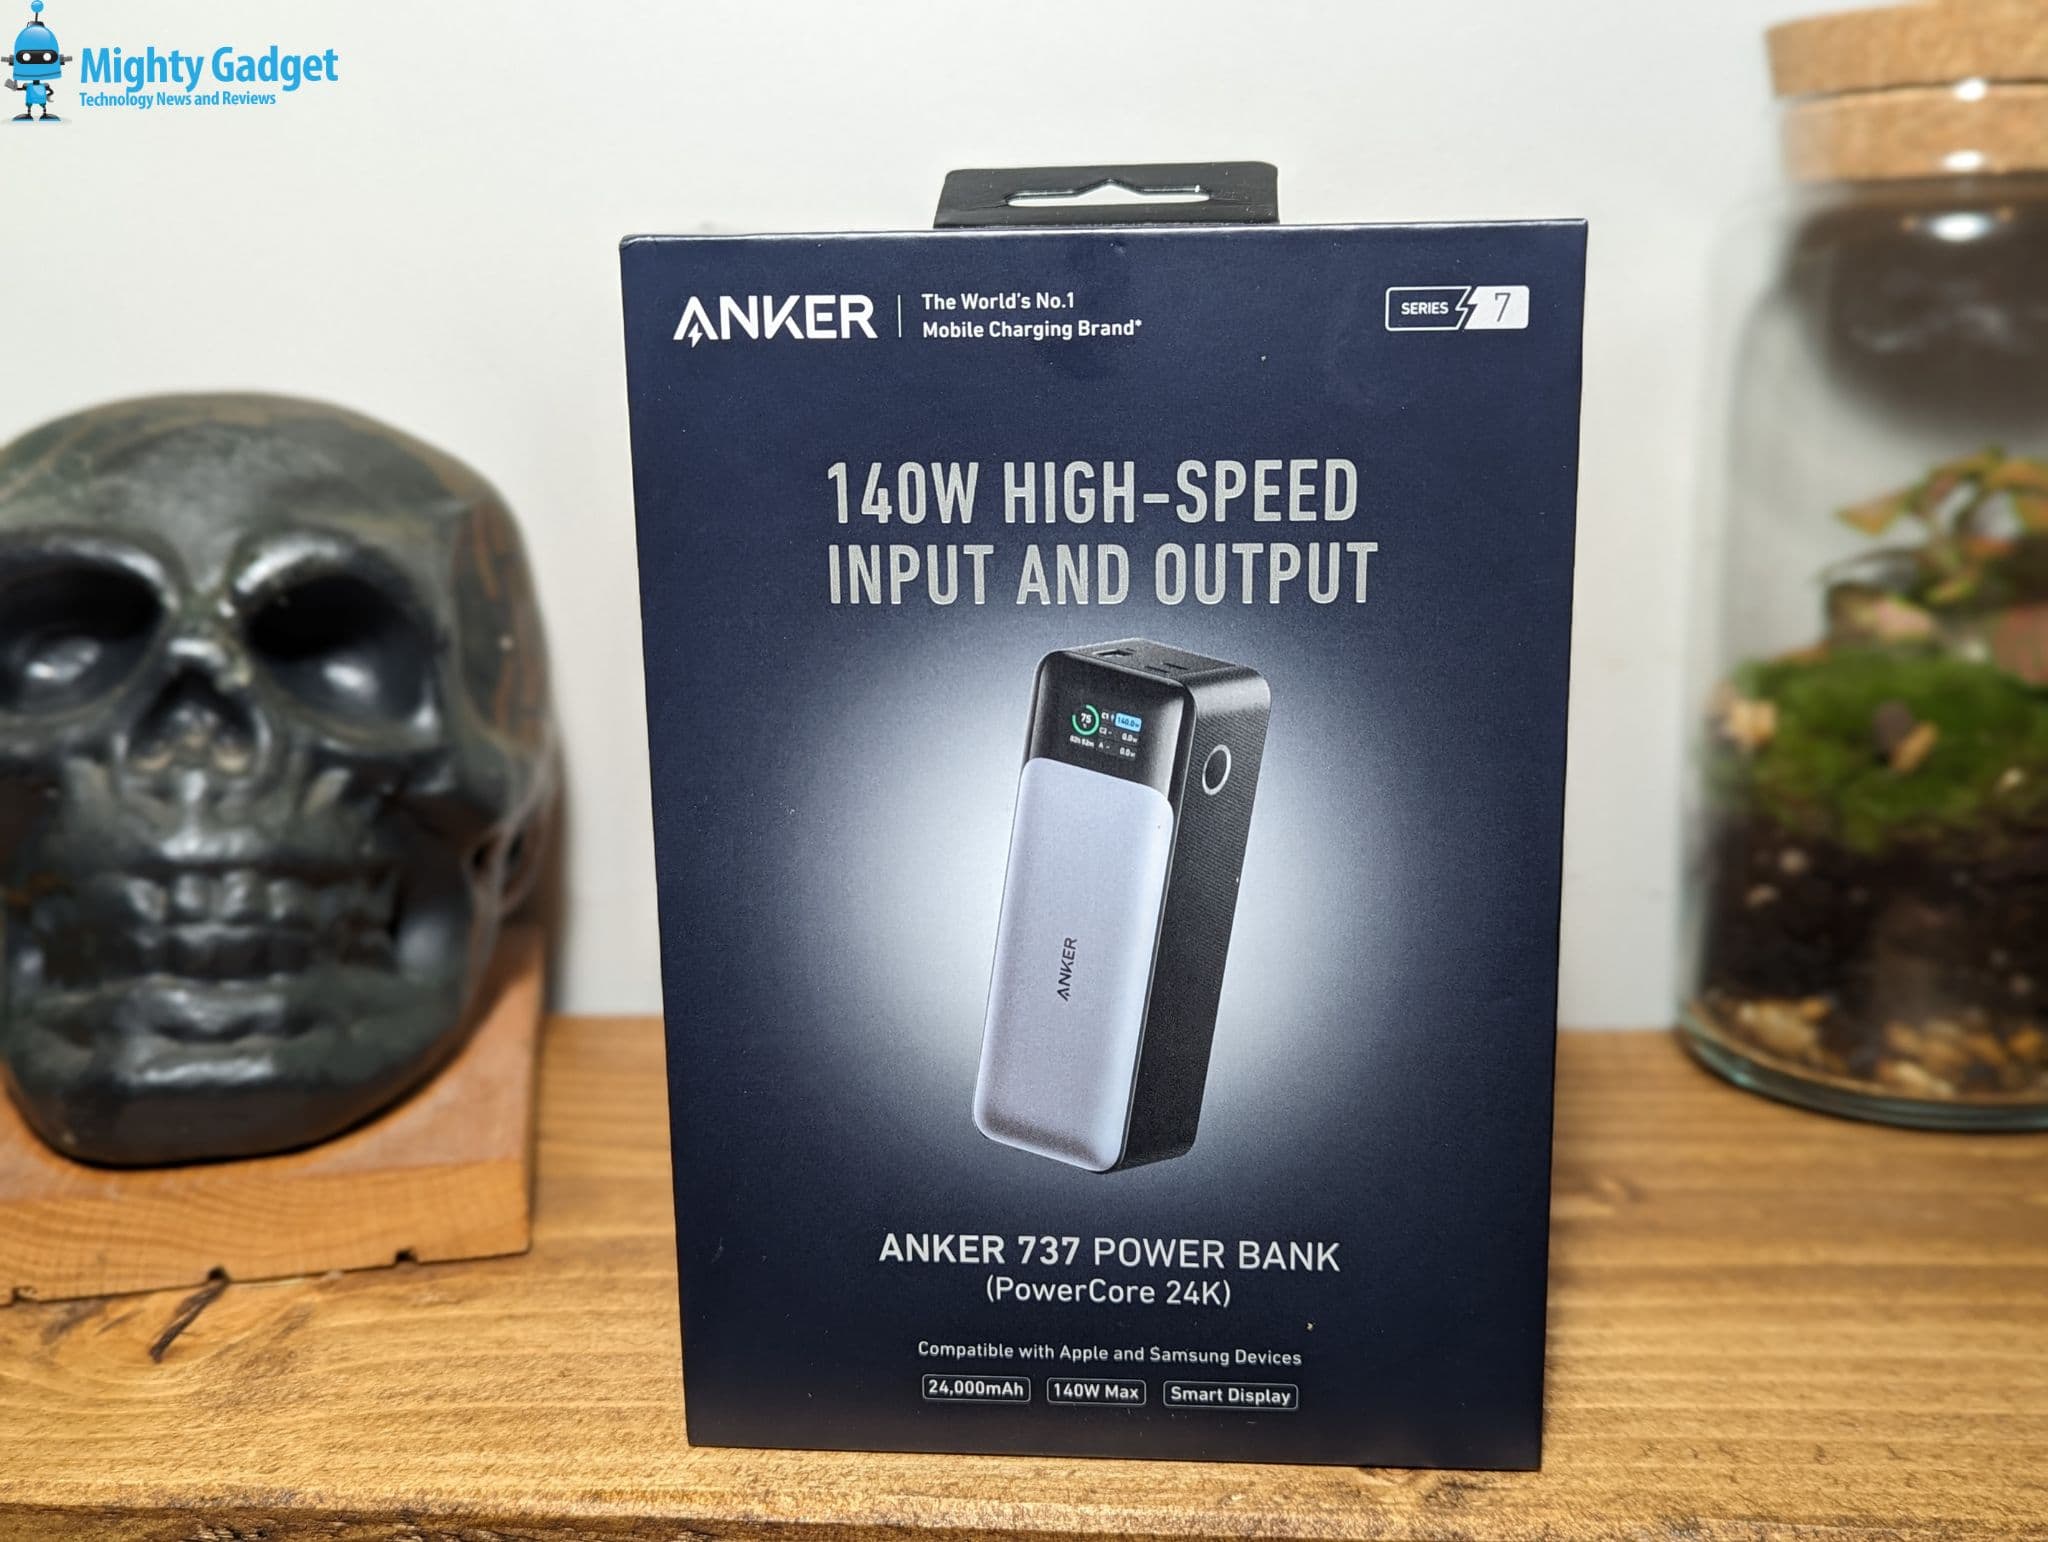 Anker 737 Power Bank (PowerCore 24K) Review – The best laptop power bank – 140W PD 3.1 output for MacBook Pro